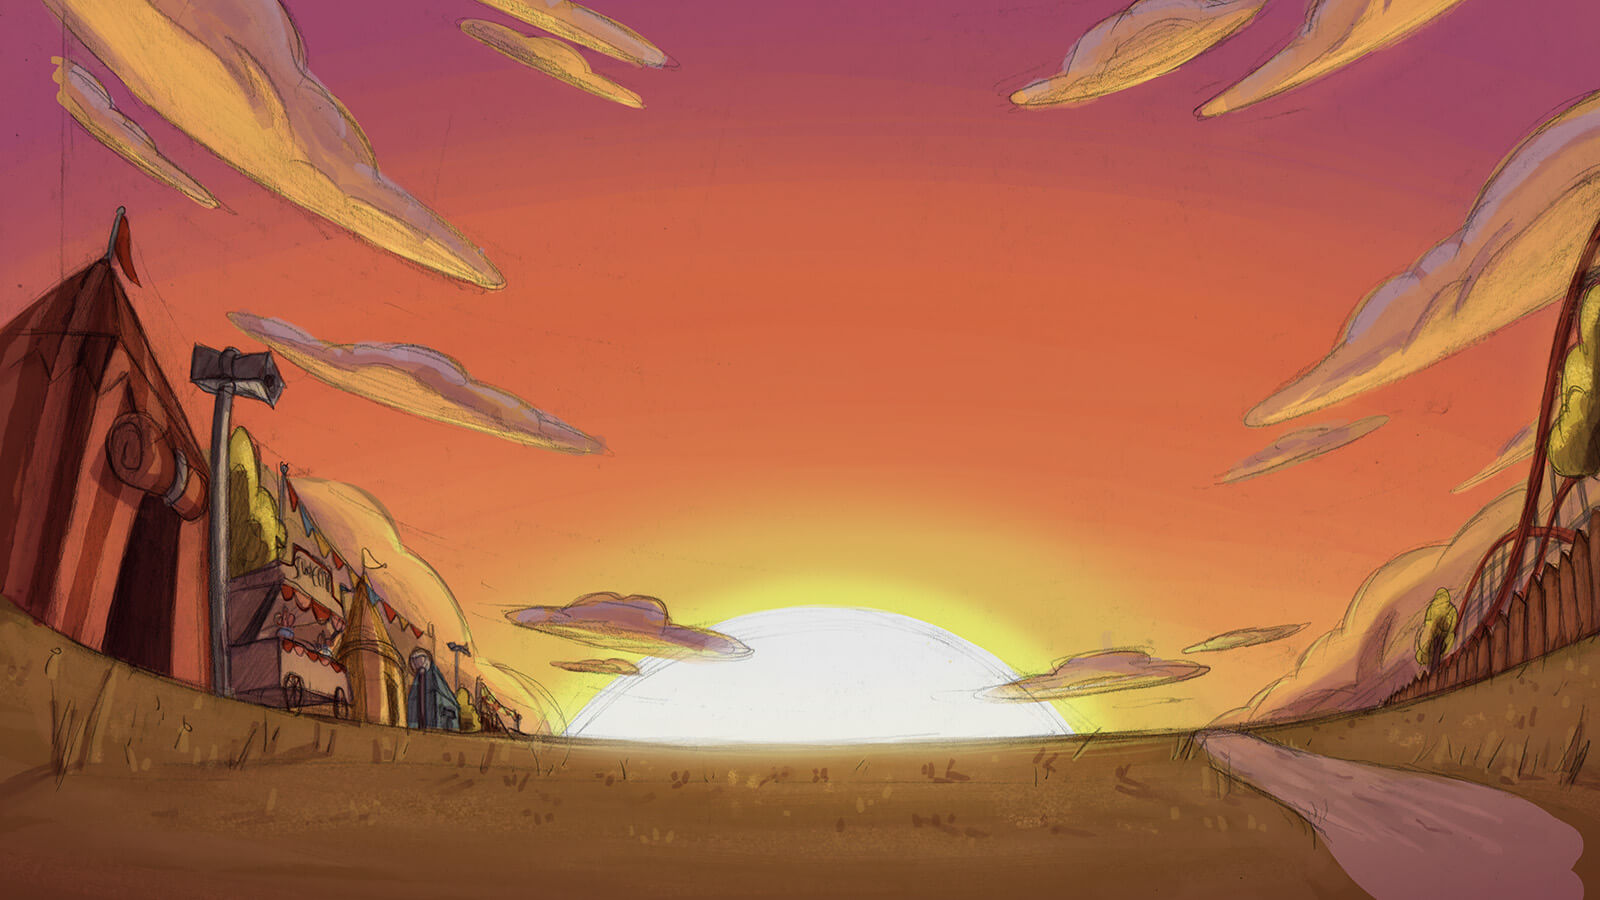 Background artwork of the carnival at sunset